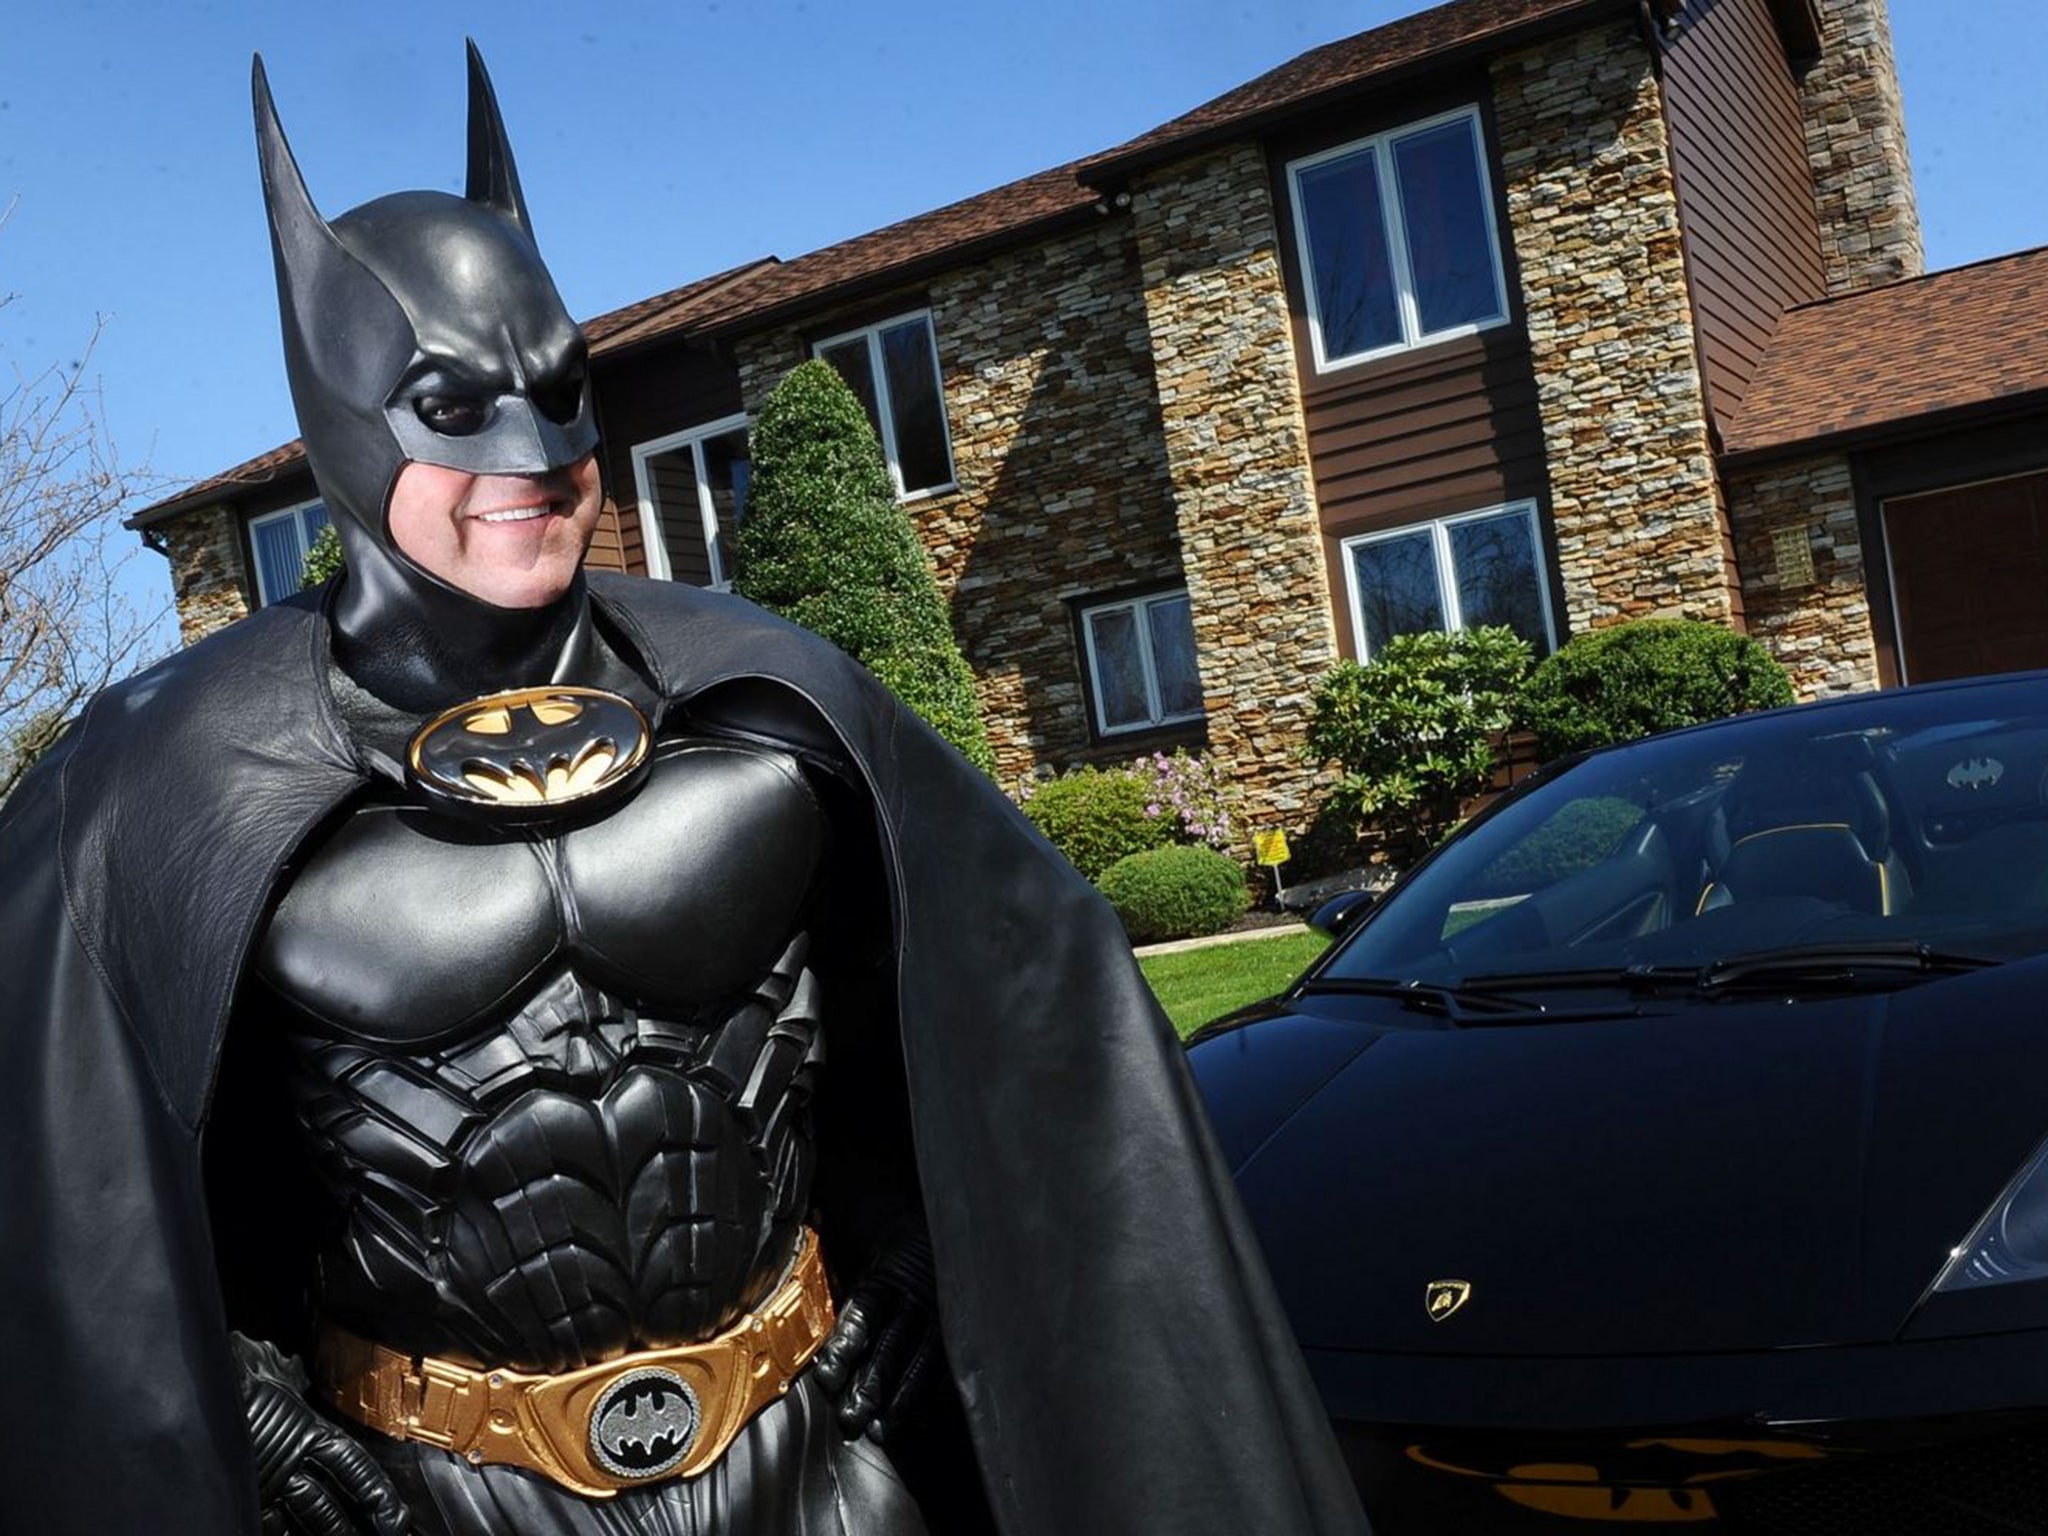 Route 29 Batman' dead: Lenny B. Robinson fatally struck by car after  Batmobile breaks down | The Independent | The Independent